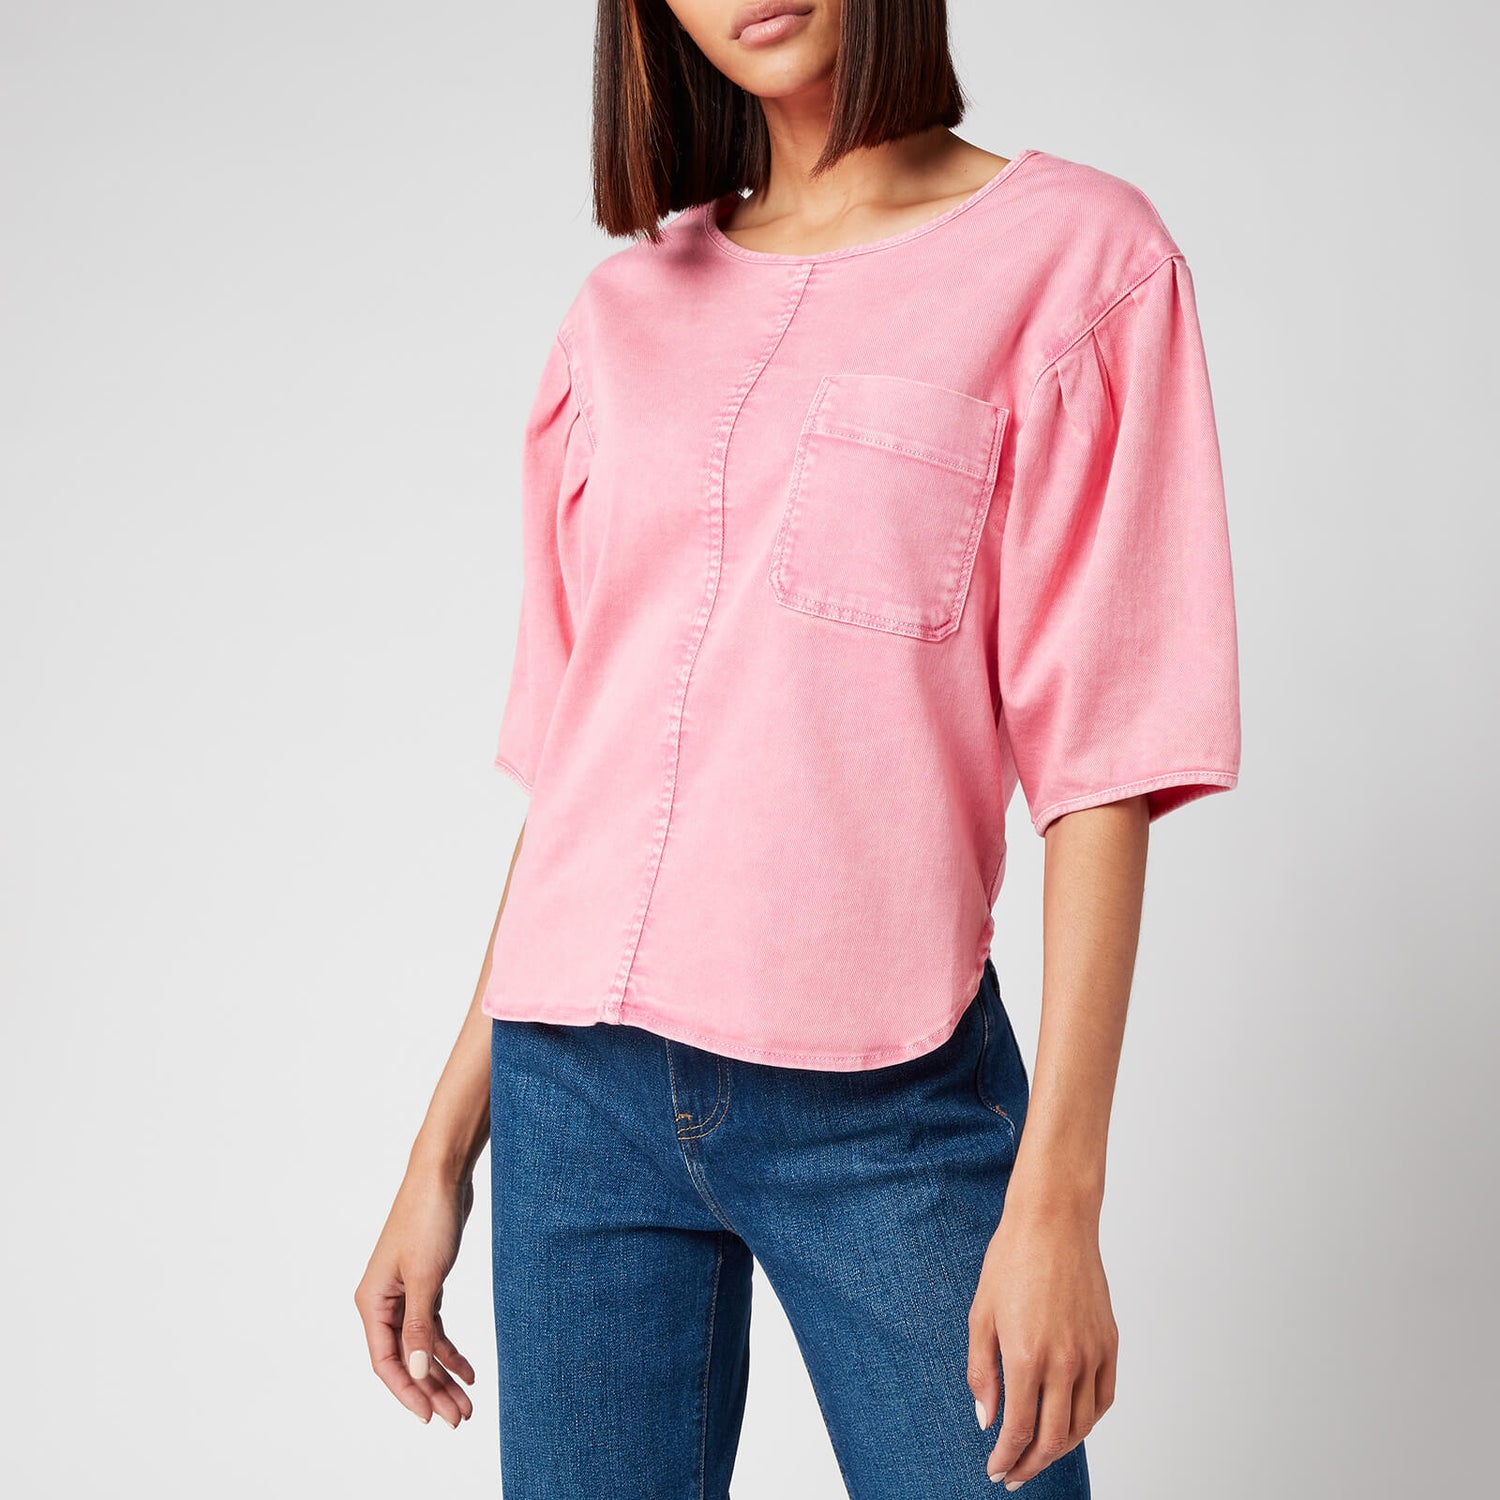 See By Chloé Women's Dyed Denim Top - Juicy Pink